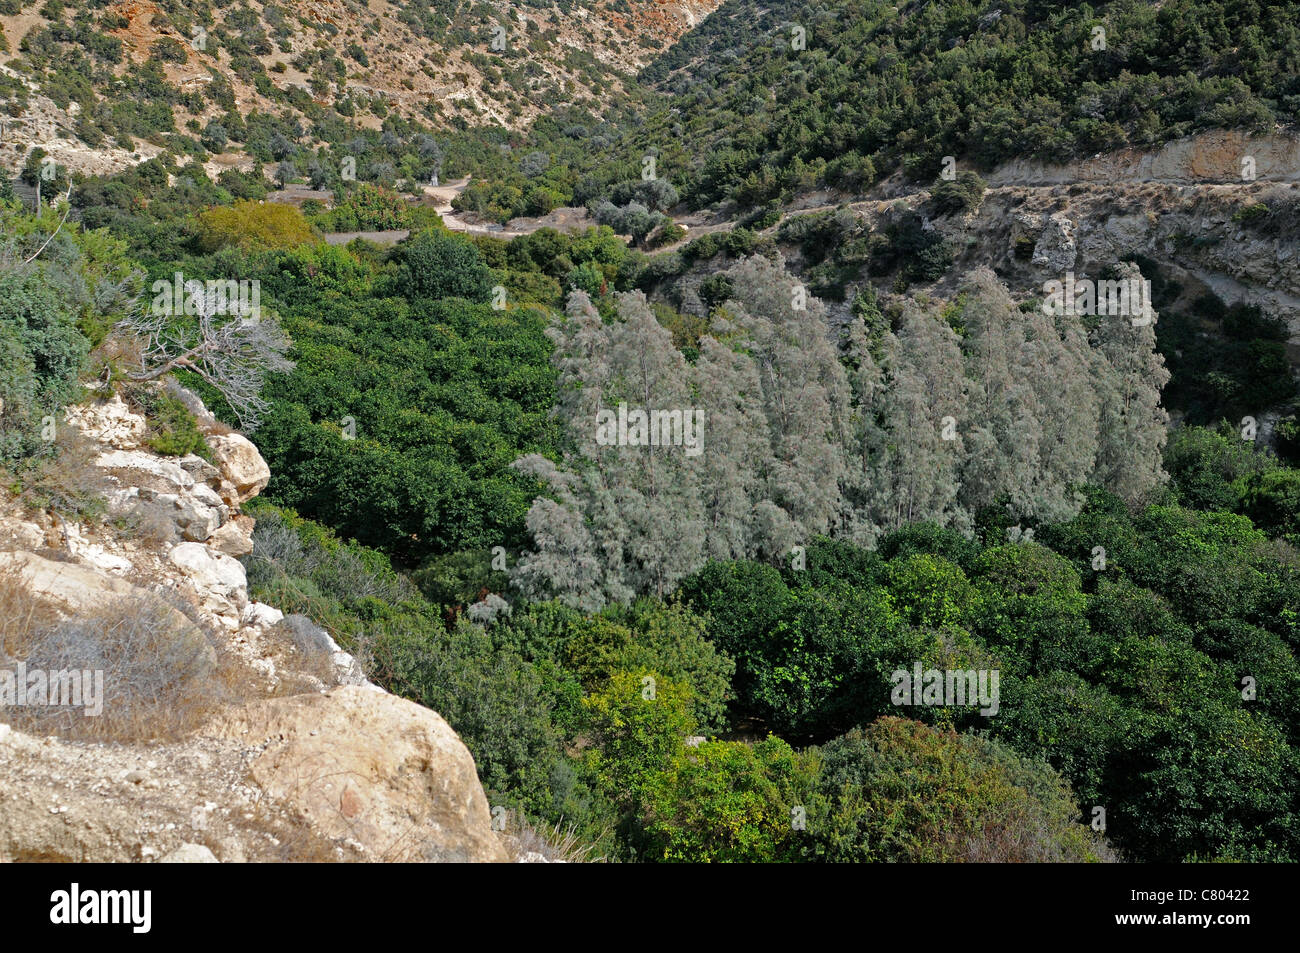 A fertile valley in a gorge in the Akamas Peninsula near the famous Akamas Gorge Stock Photo